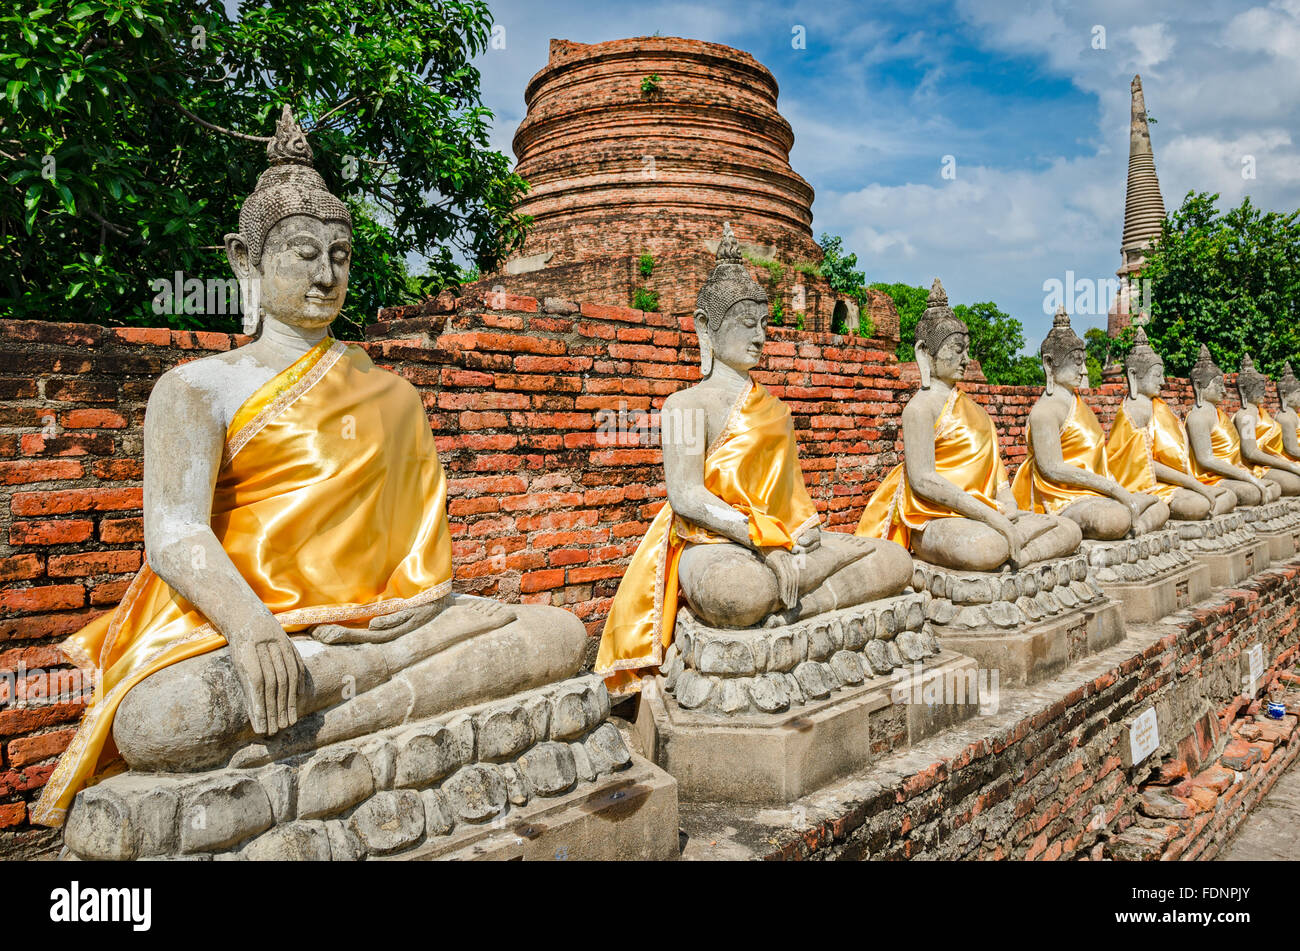 Ayutthaya (Thailand), Buddha statues in an old temple ruins Stock Photo